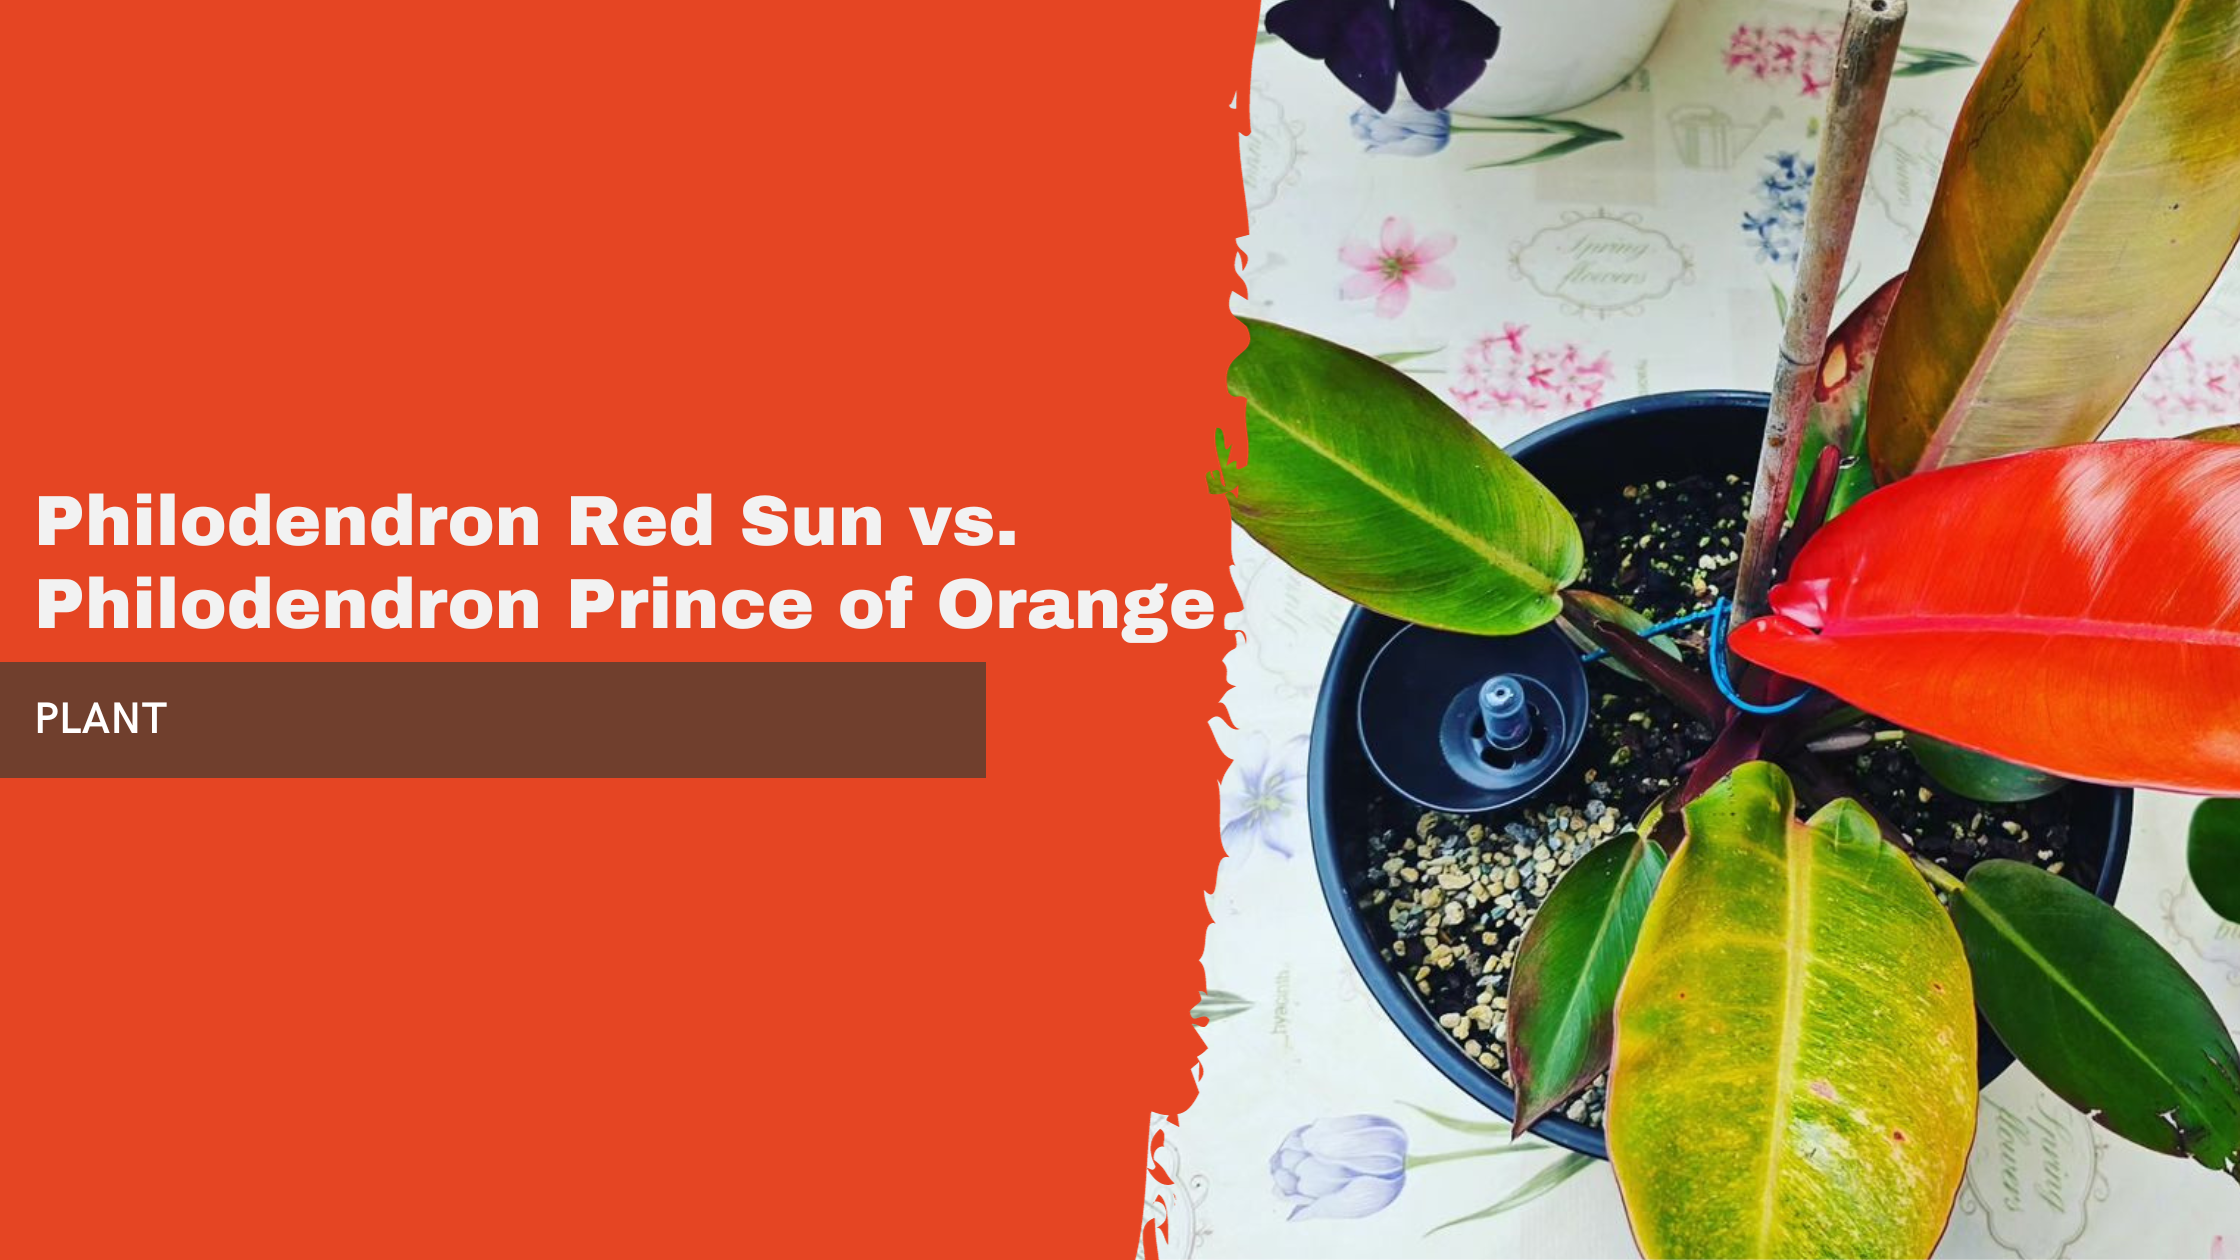 Philodendron Red Sun vs. Philodendron Prince of Orange